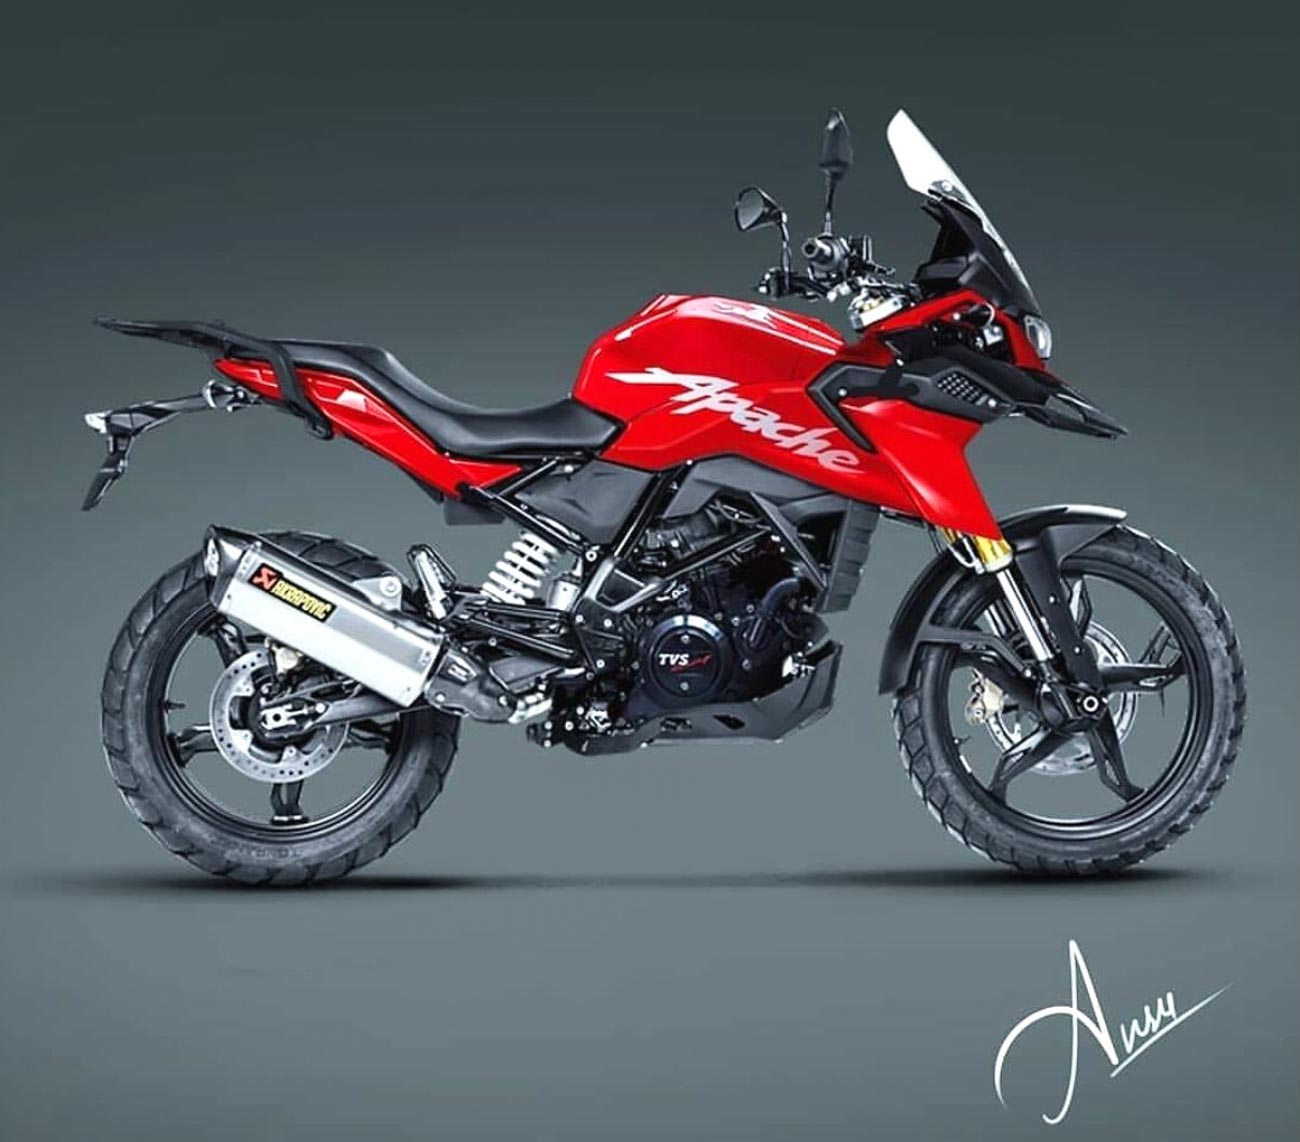 TVS Apache RR310-Based Adventure Bike Expected To Debut Next Year